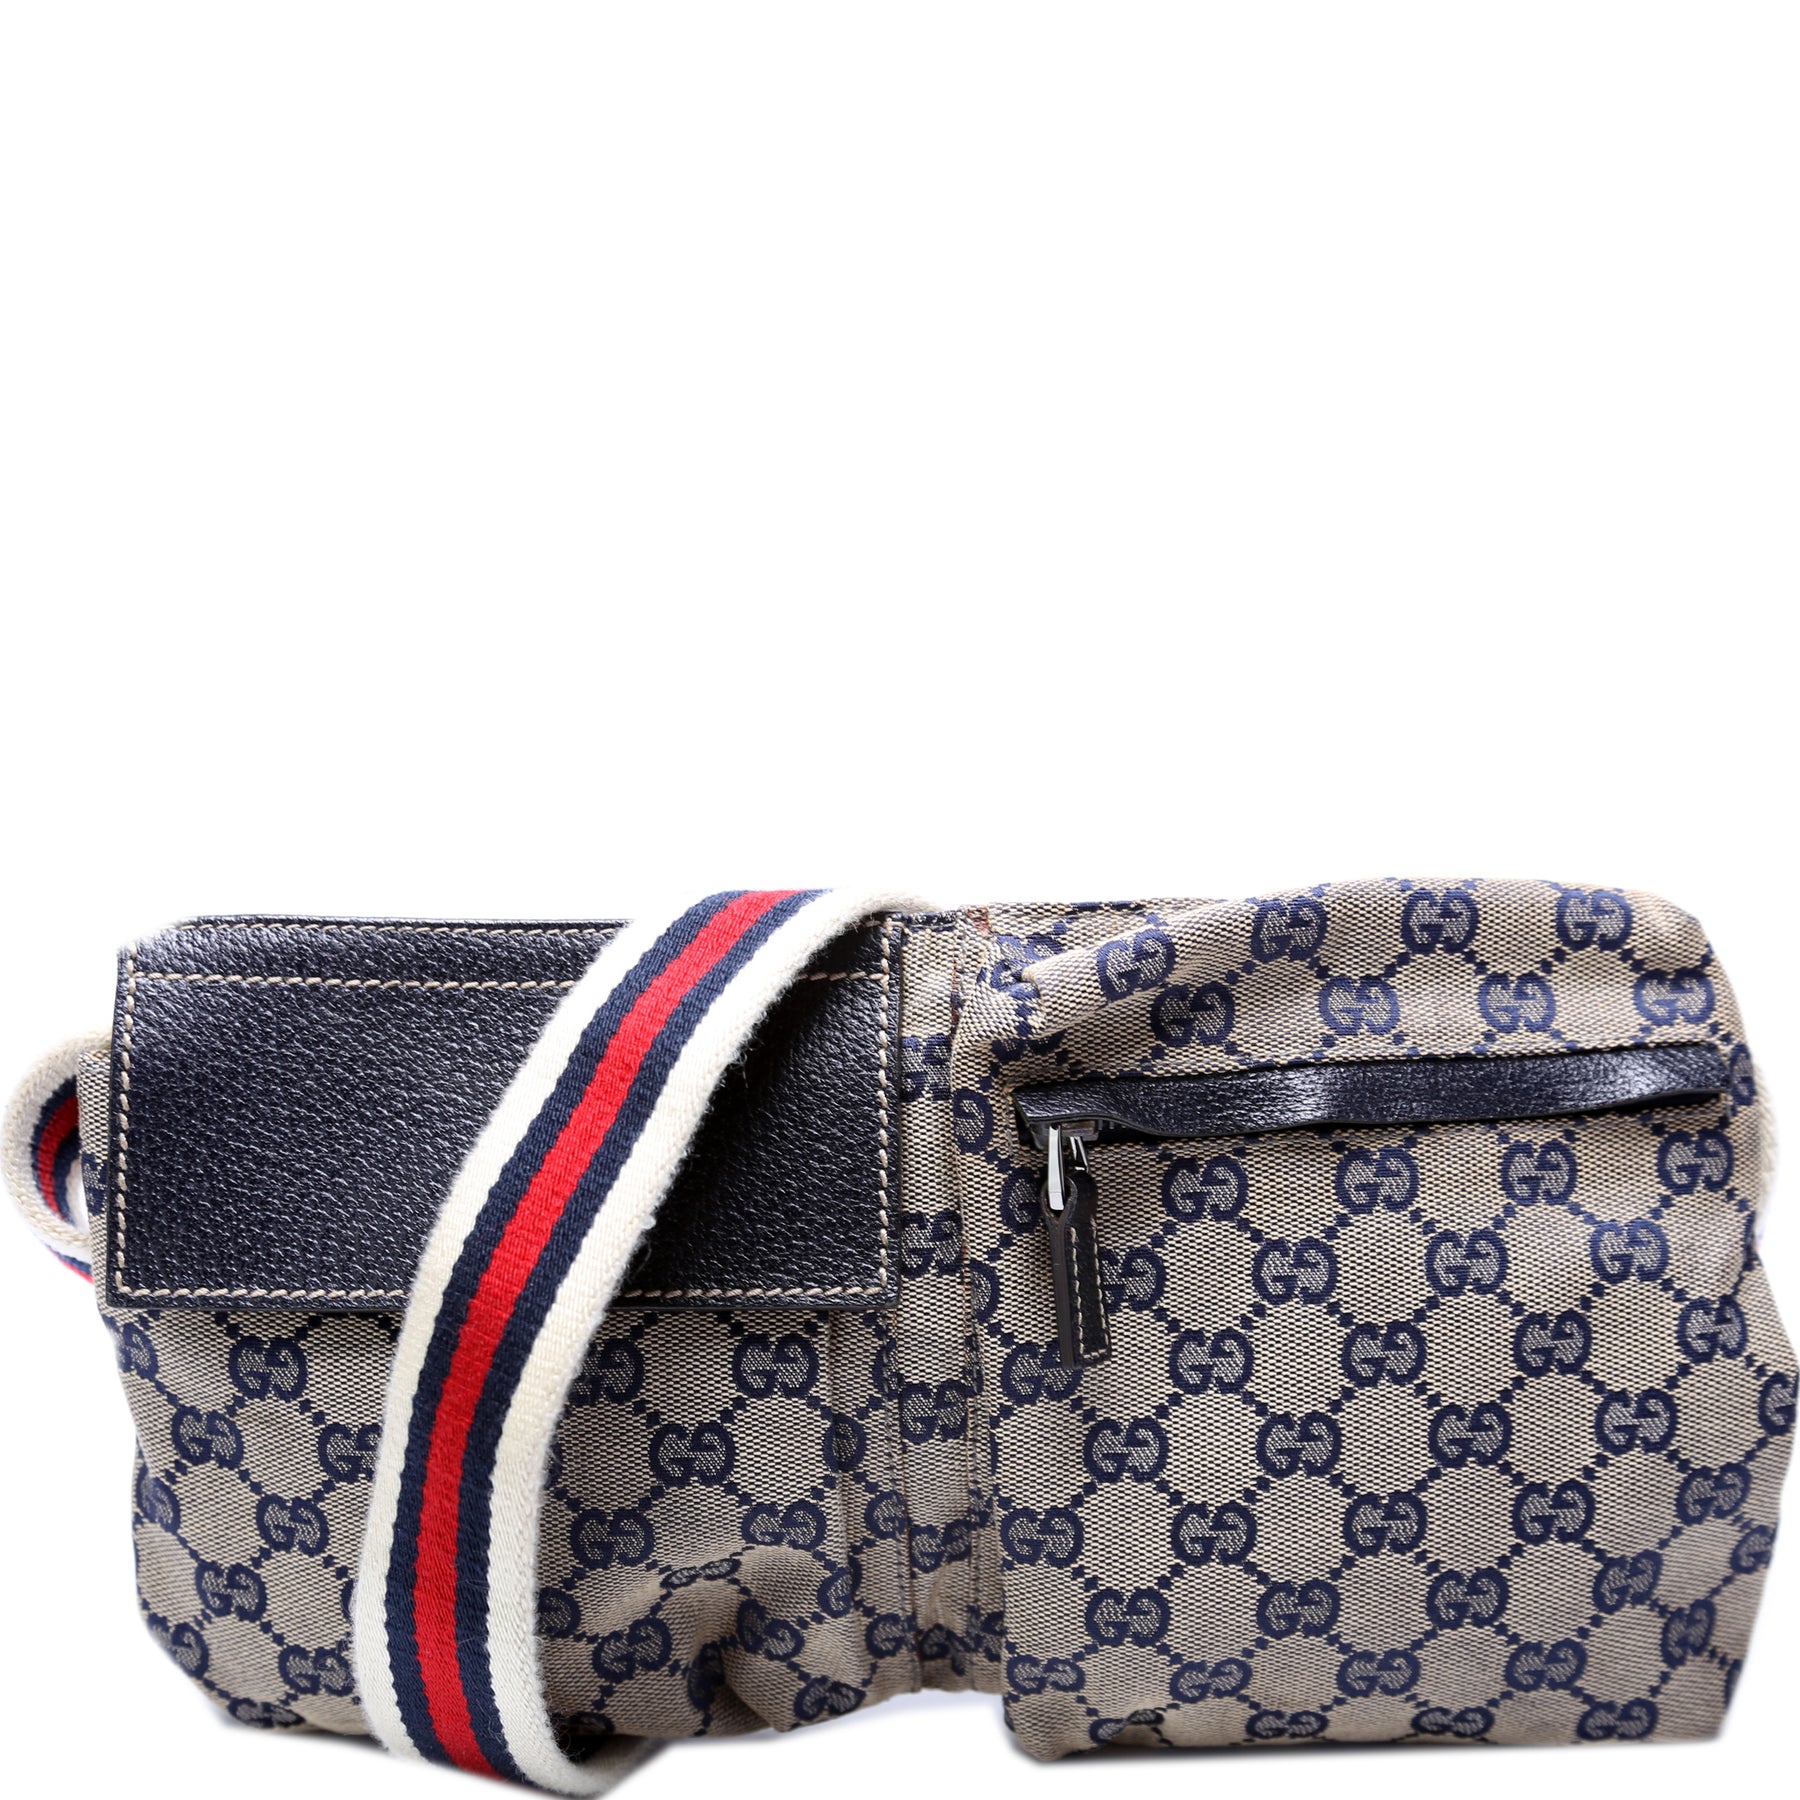 LOUIS VUITTON KEY POUCH IN MONOGRAM CANVAS  3 YEAR REVIEW + WEAR AND TEAR   IS IT WORTH $325 USD? 